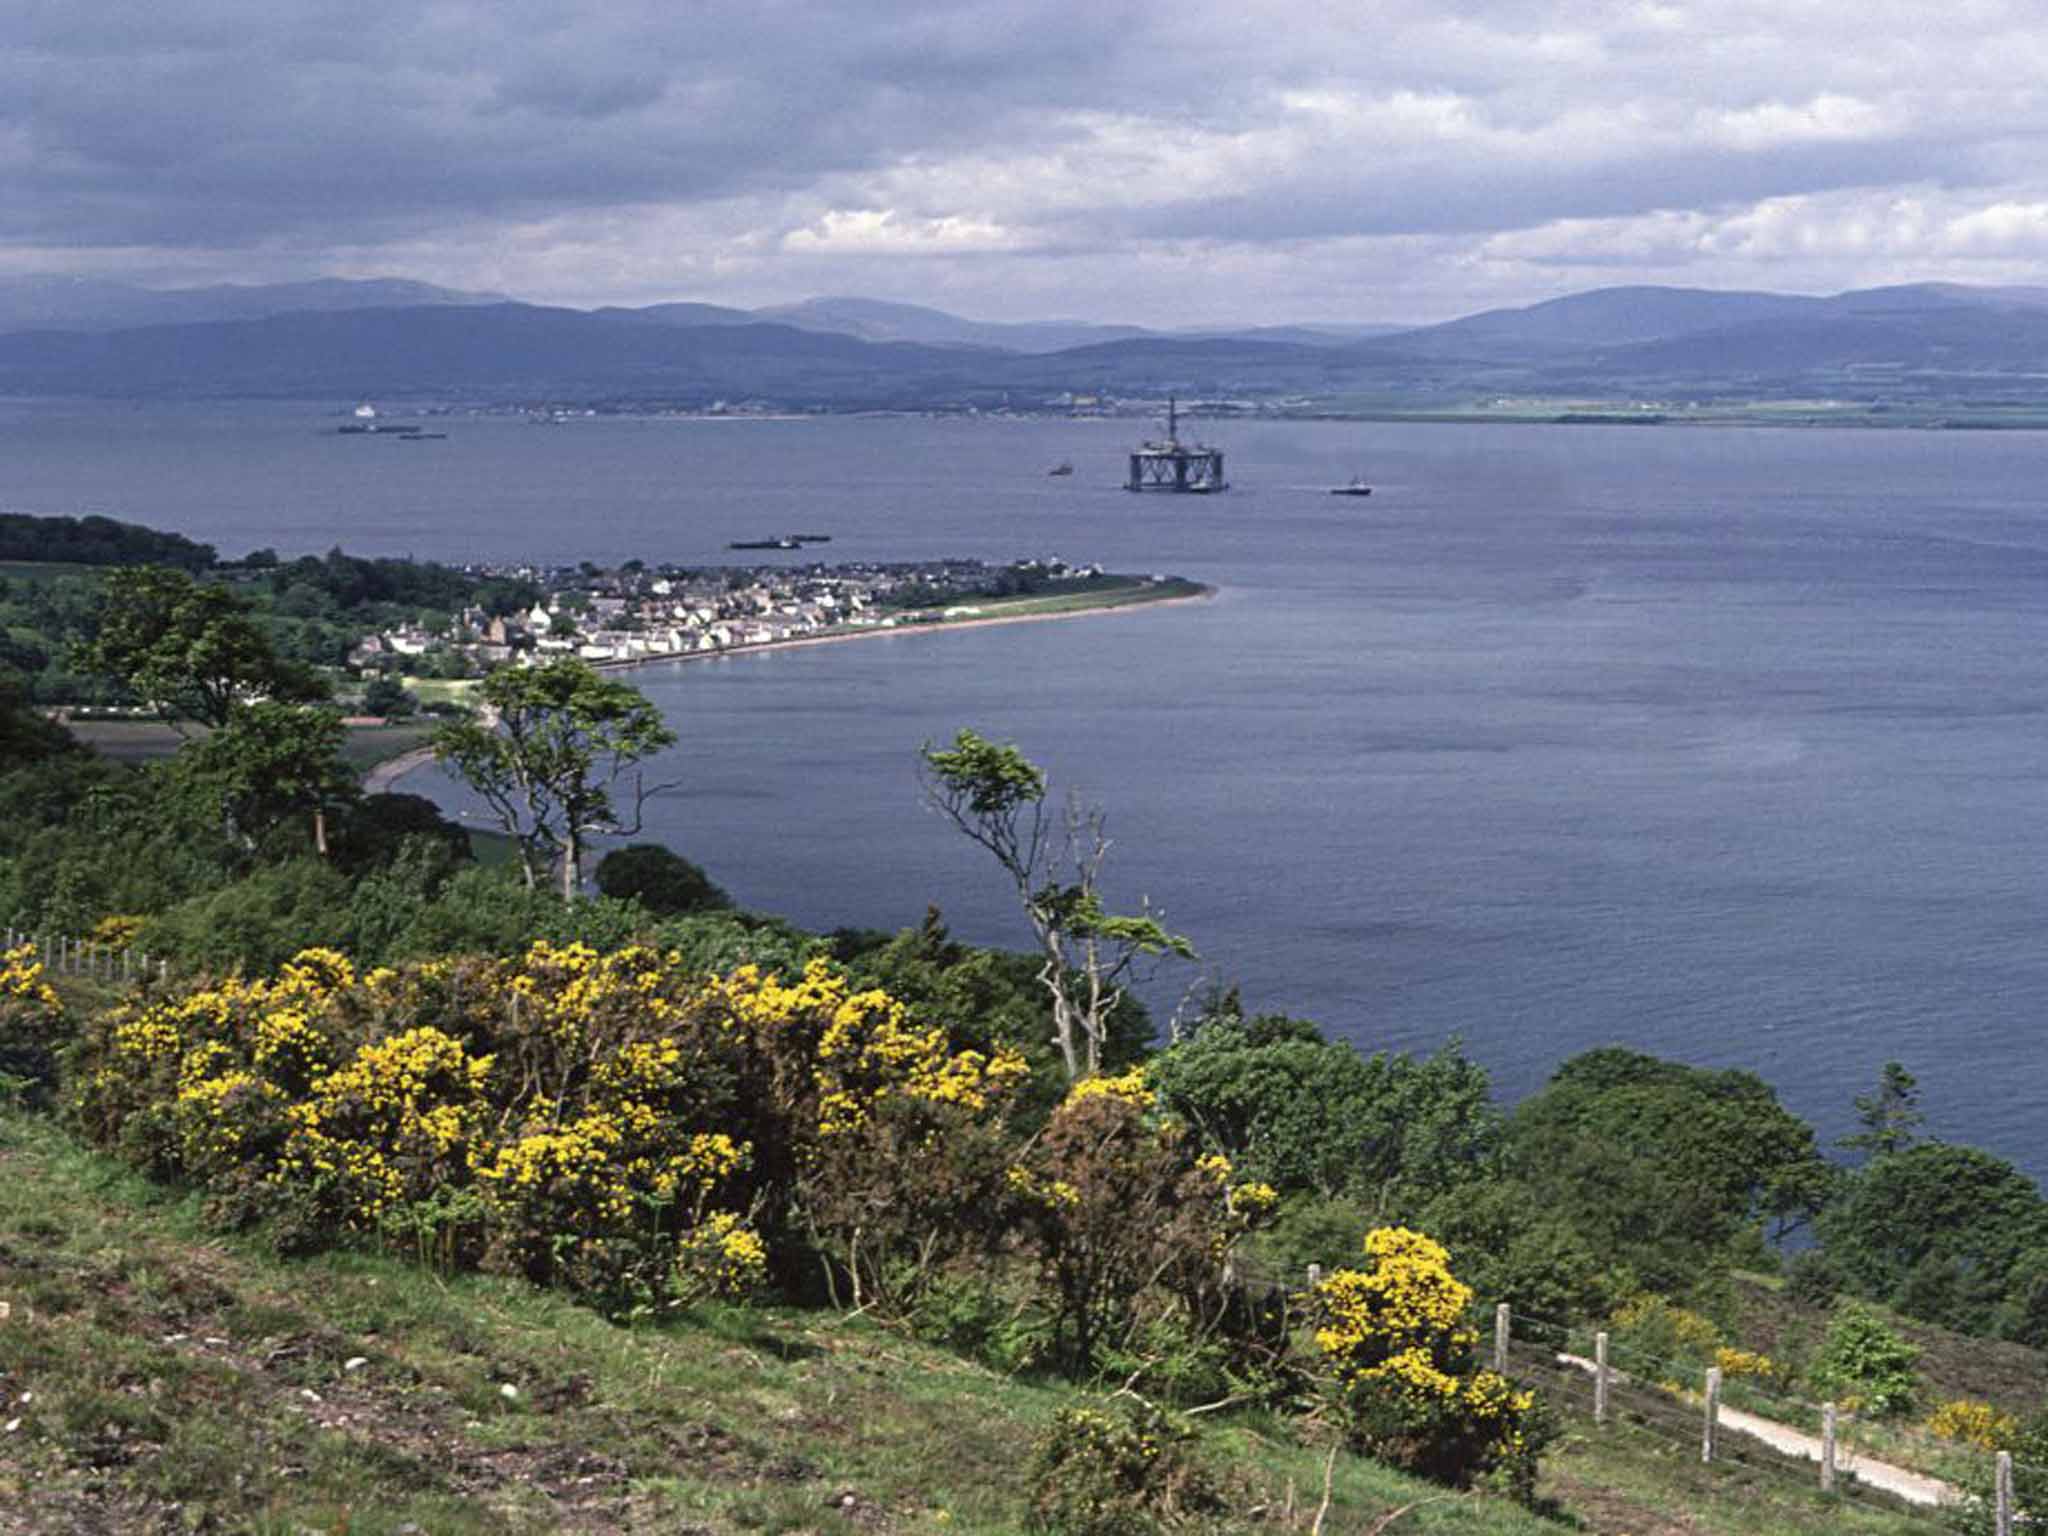 A view of Cromarty from the Sutors